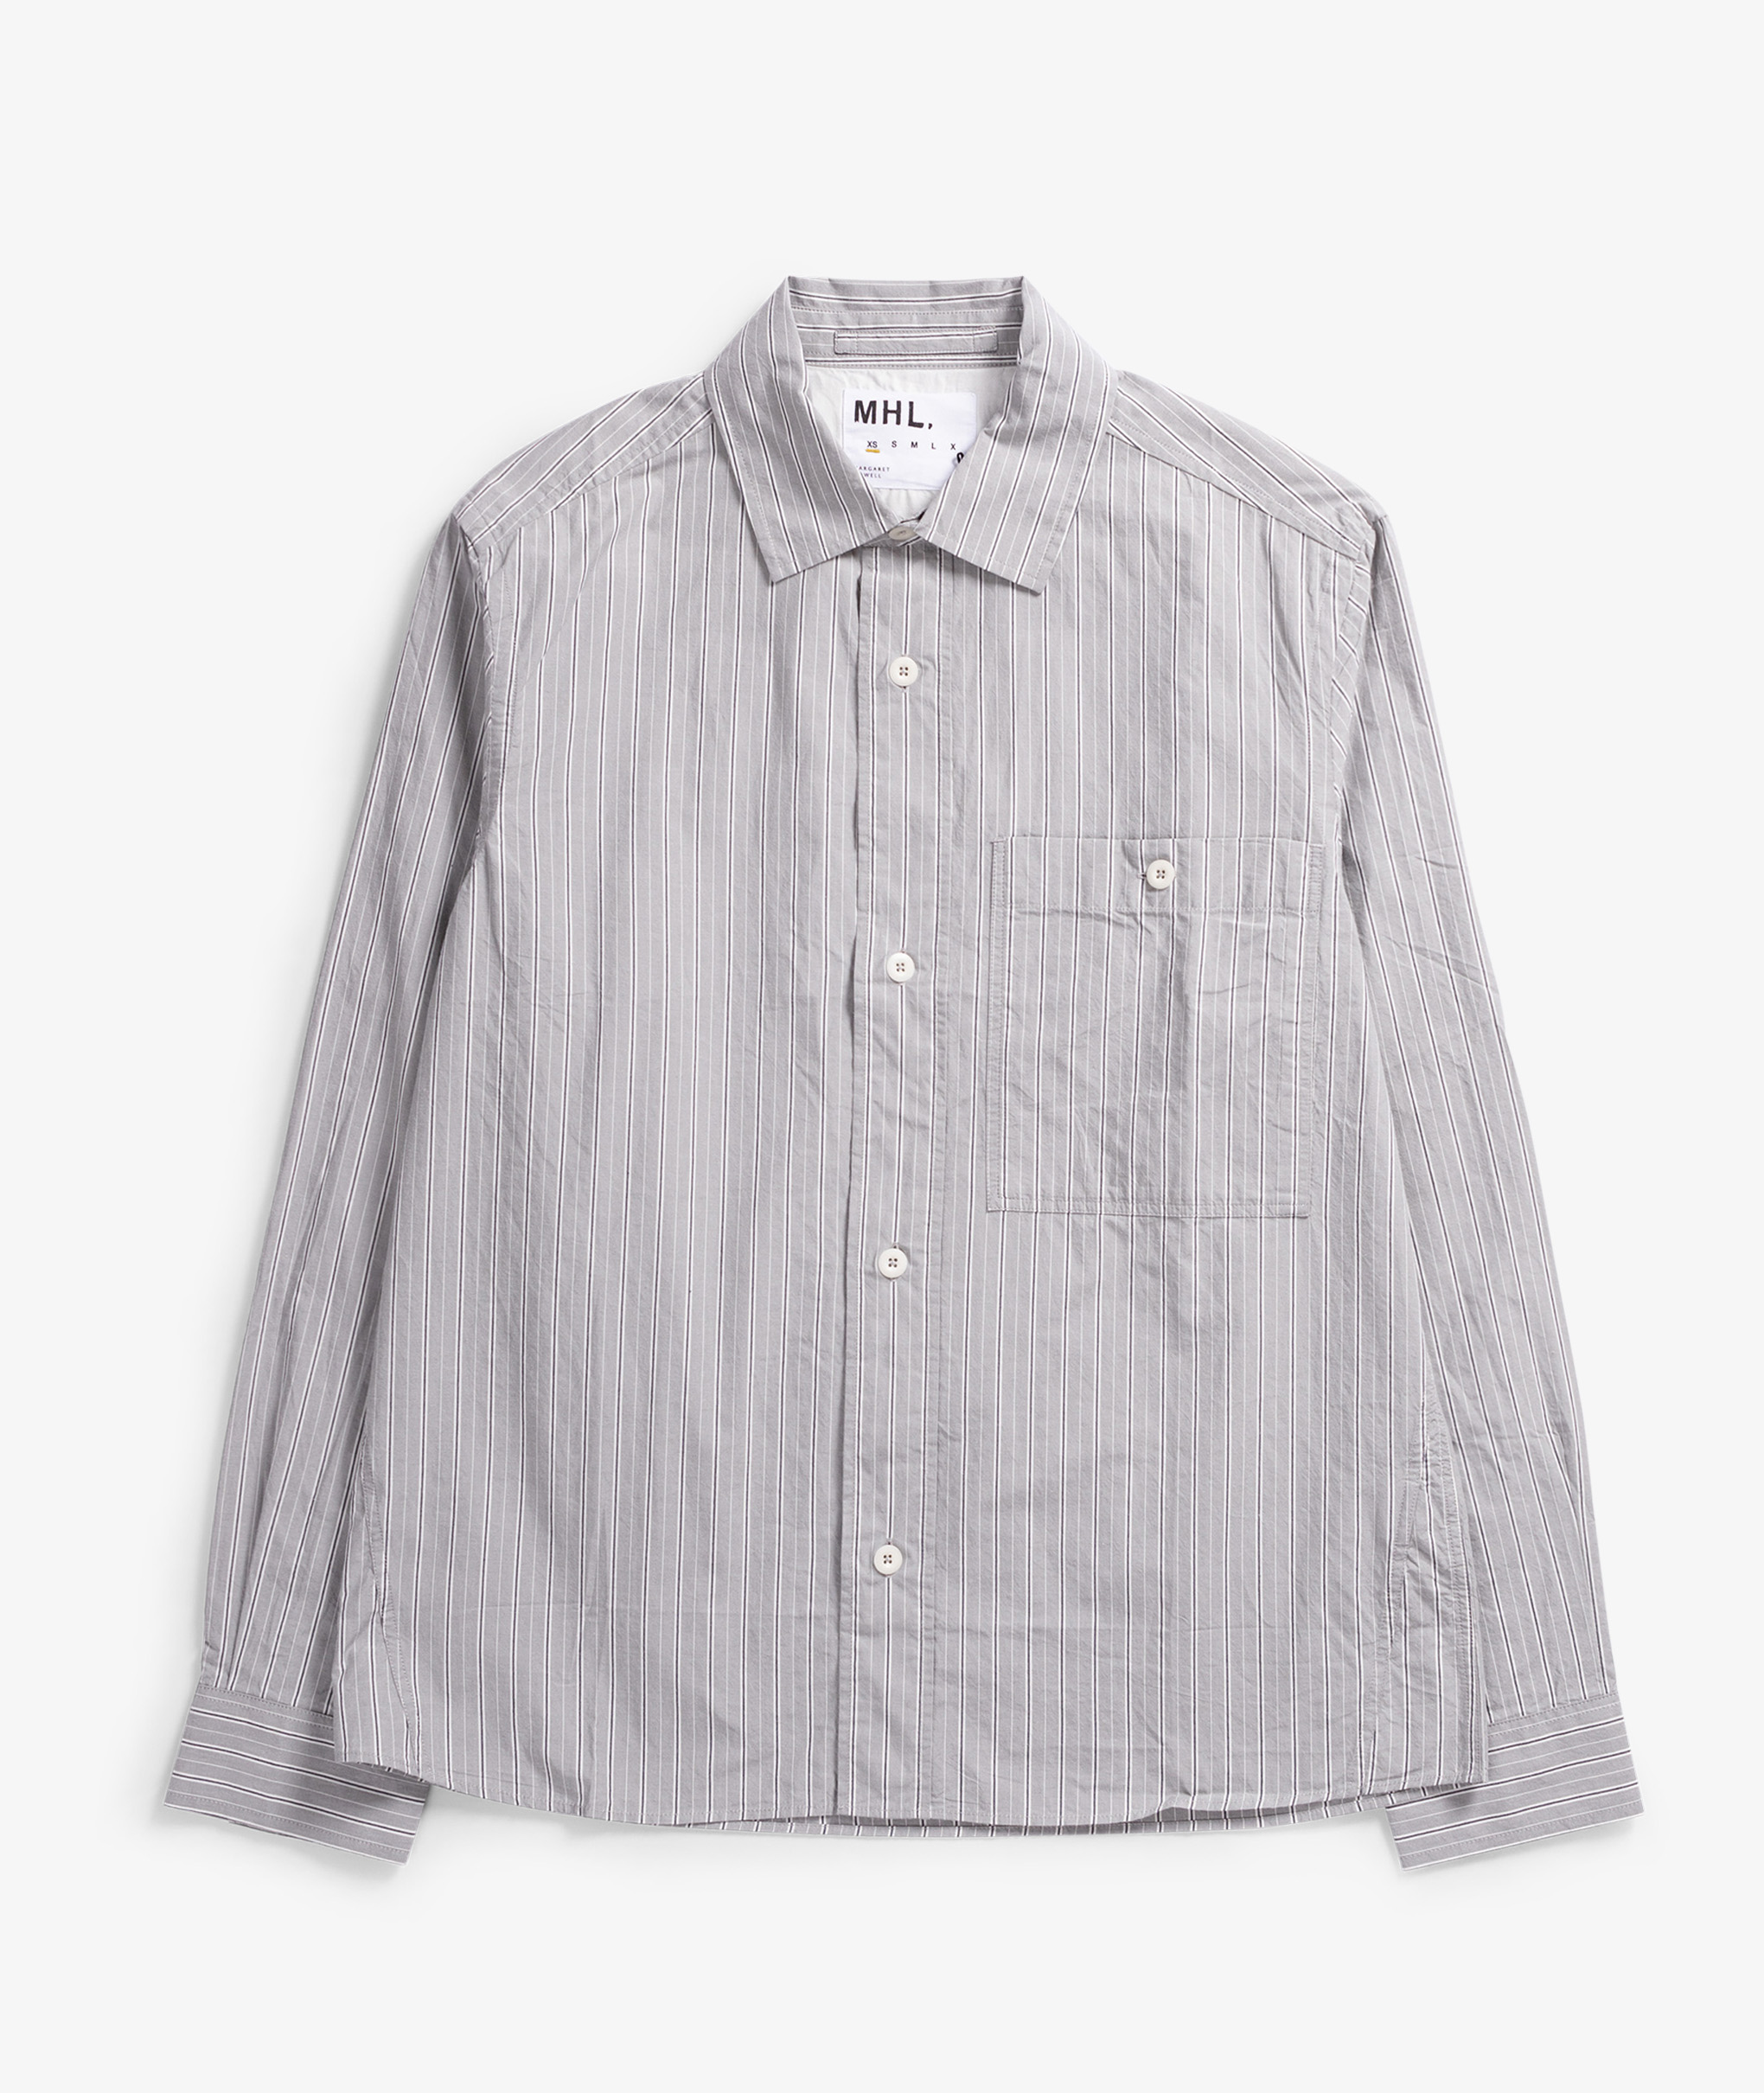 Norse Store  Shipping Worldwide - Margaret Howell MHL Overall Shirt - Grey  / Black